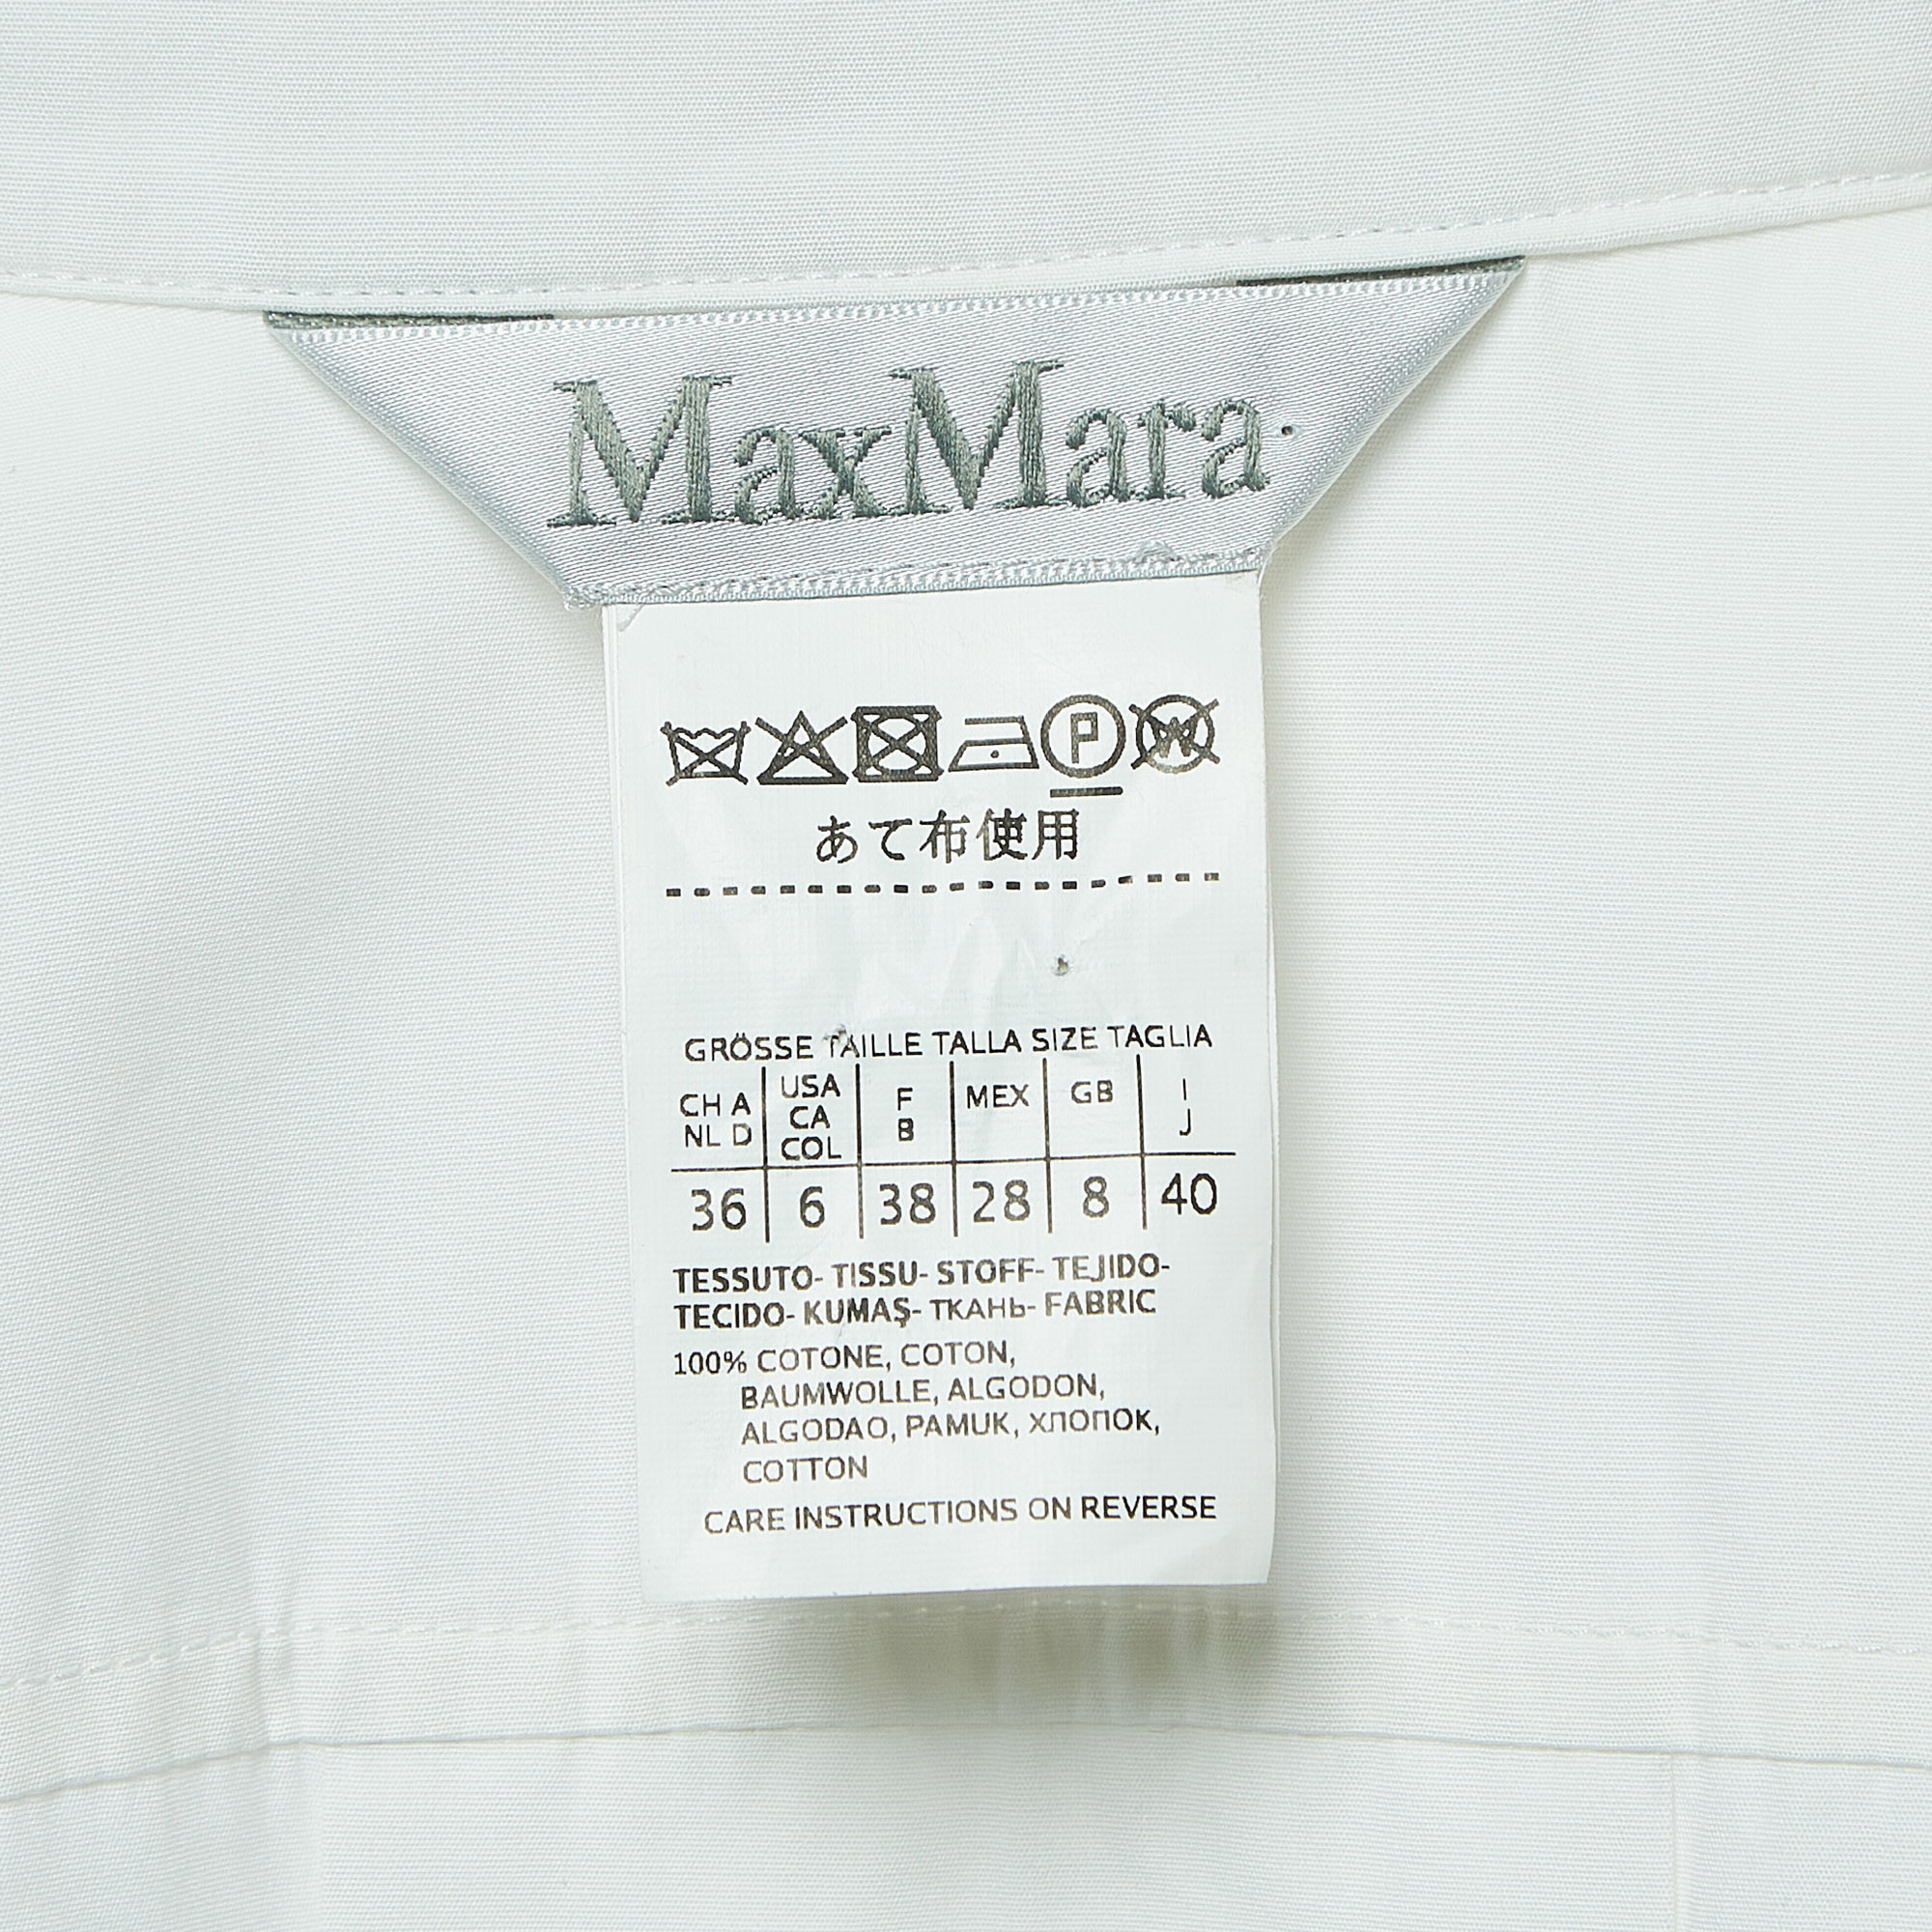 Max Mara White Cotton Button Front Belted Tunic Top S